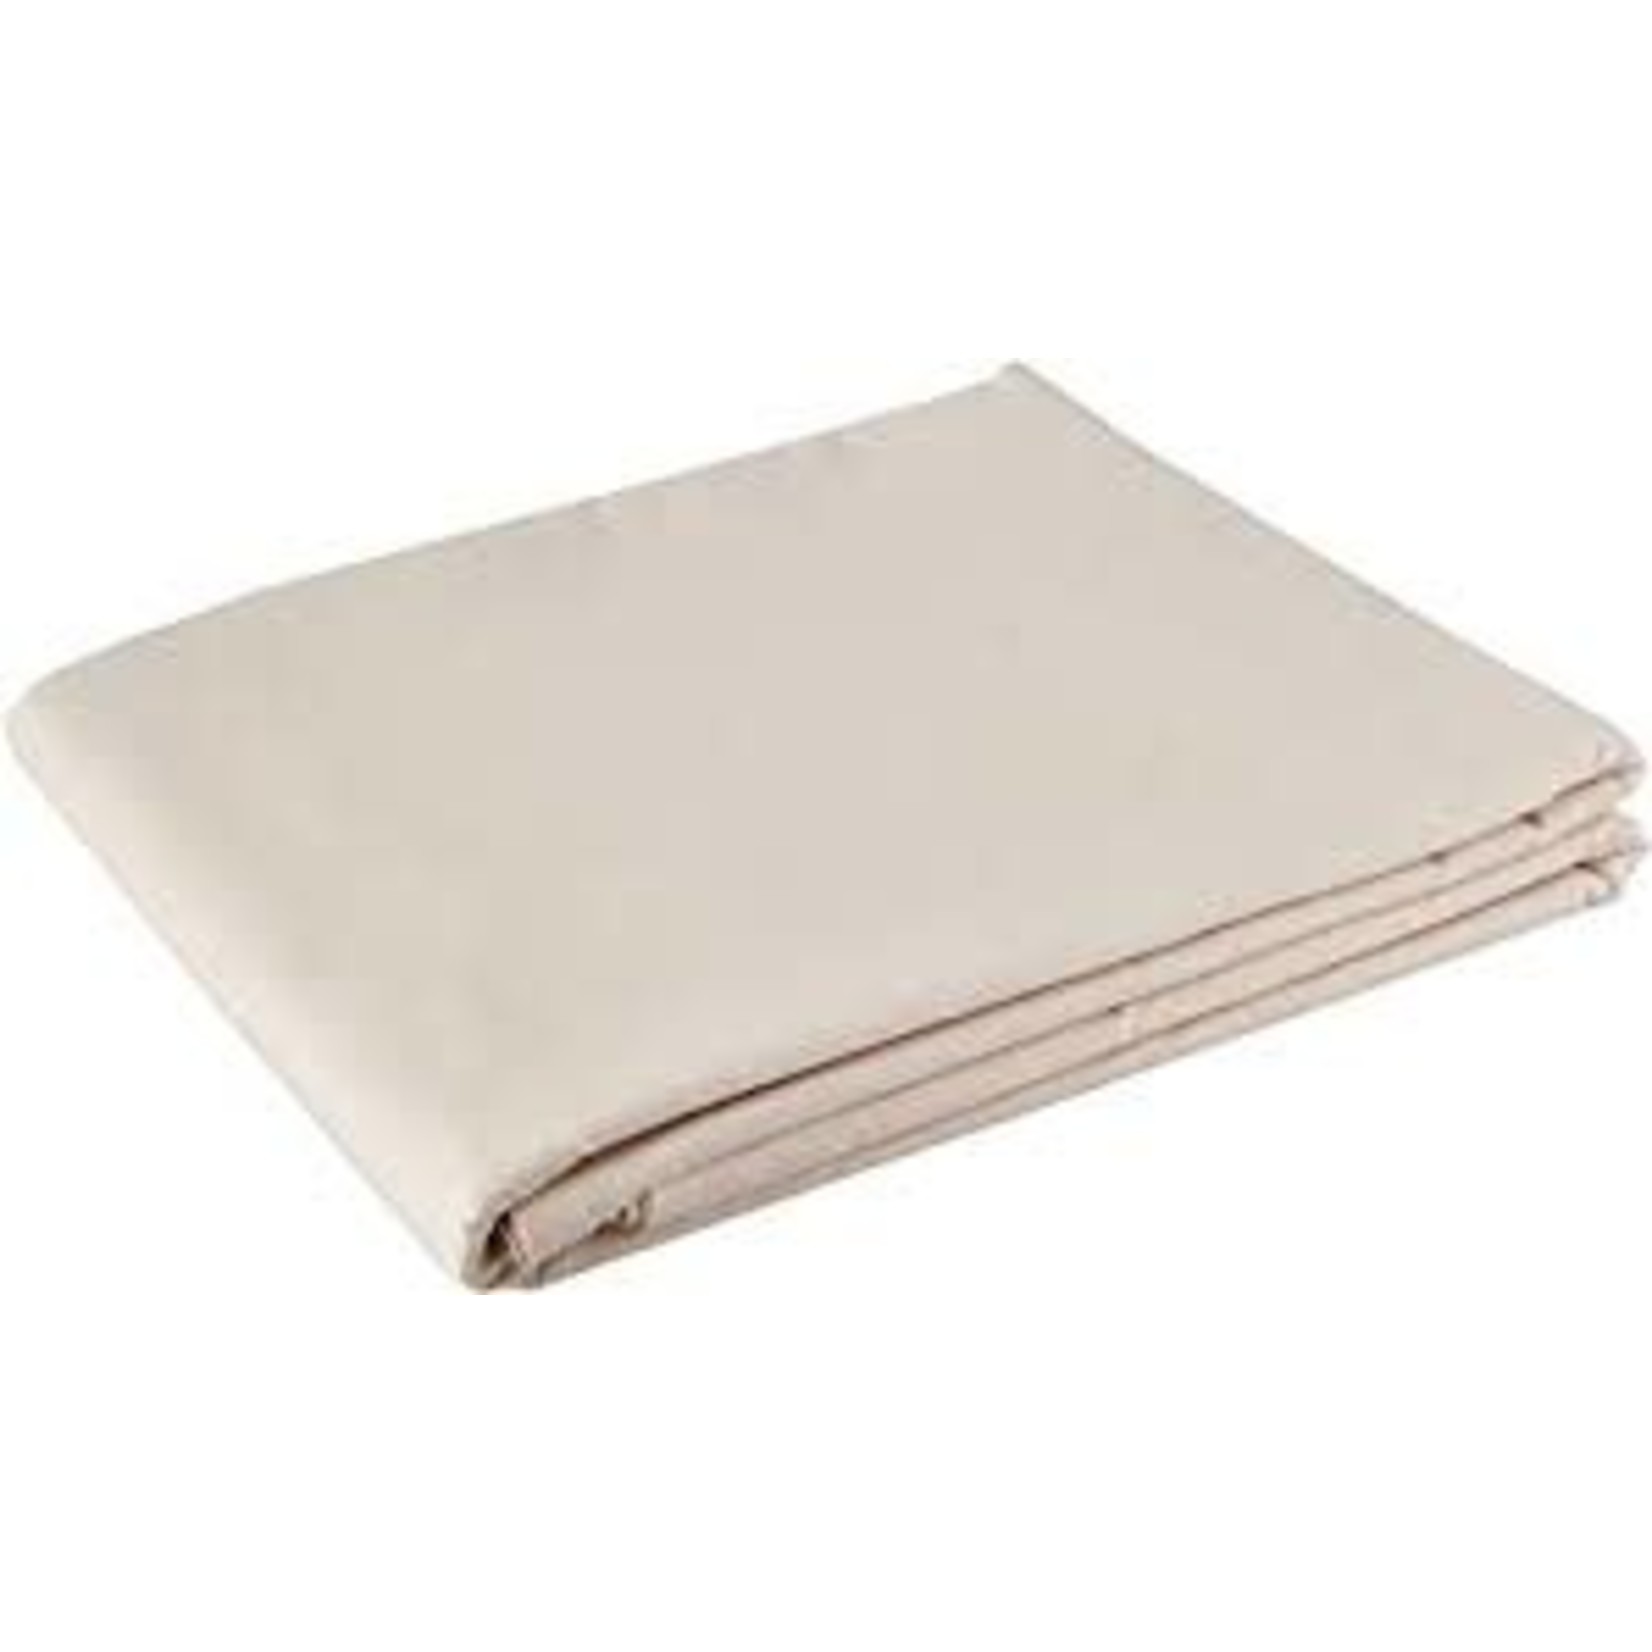 72IN UNBLEACHED CANVAS - 100% COTTON - PER METER